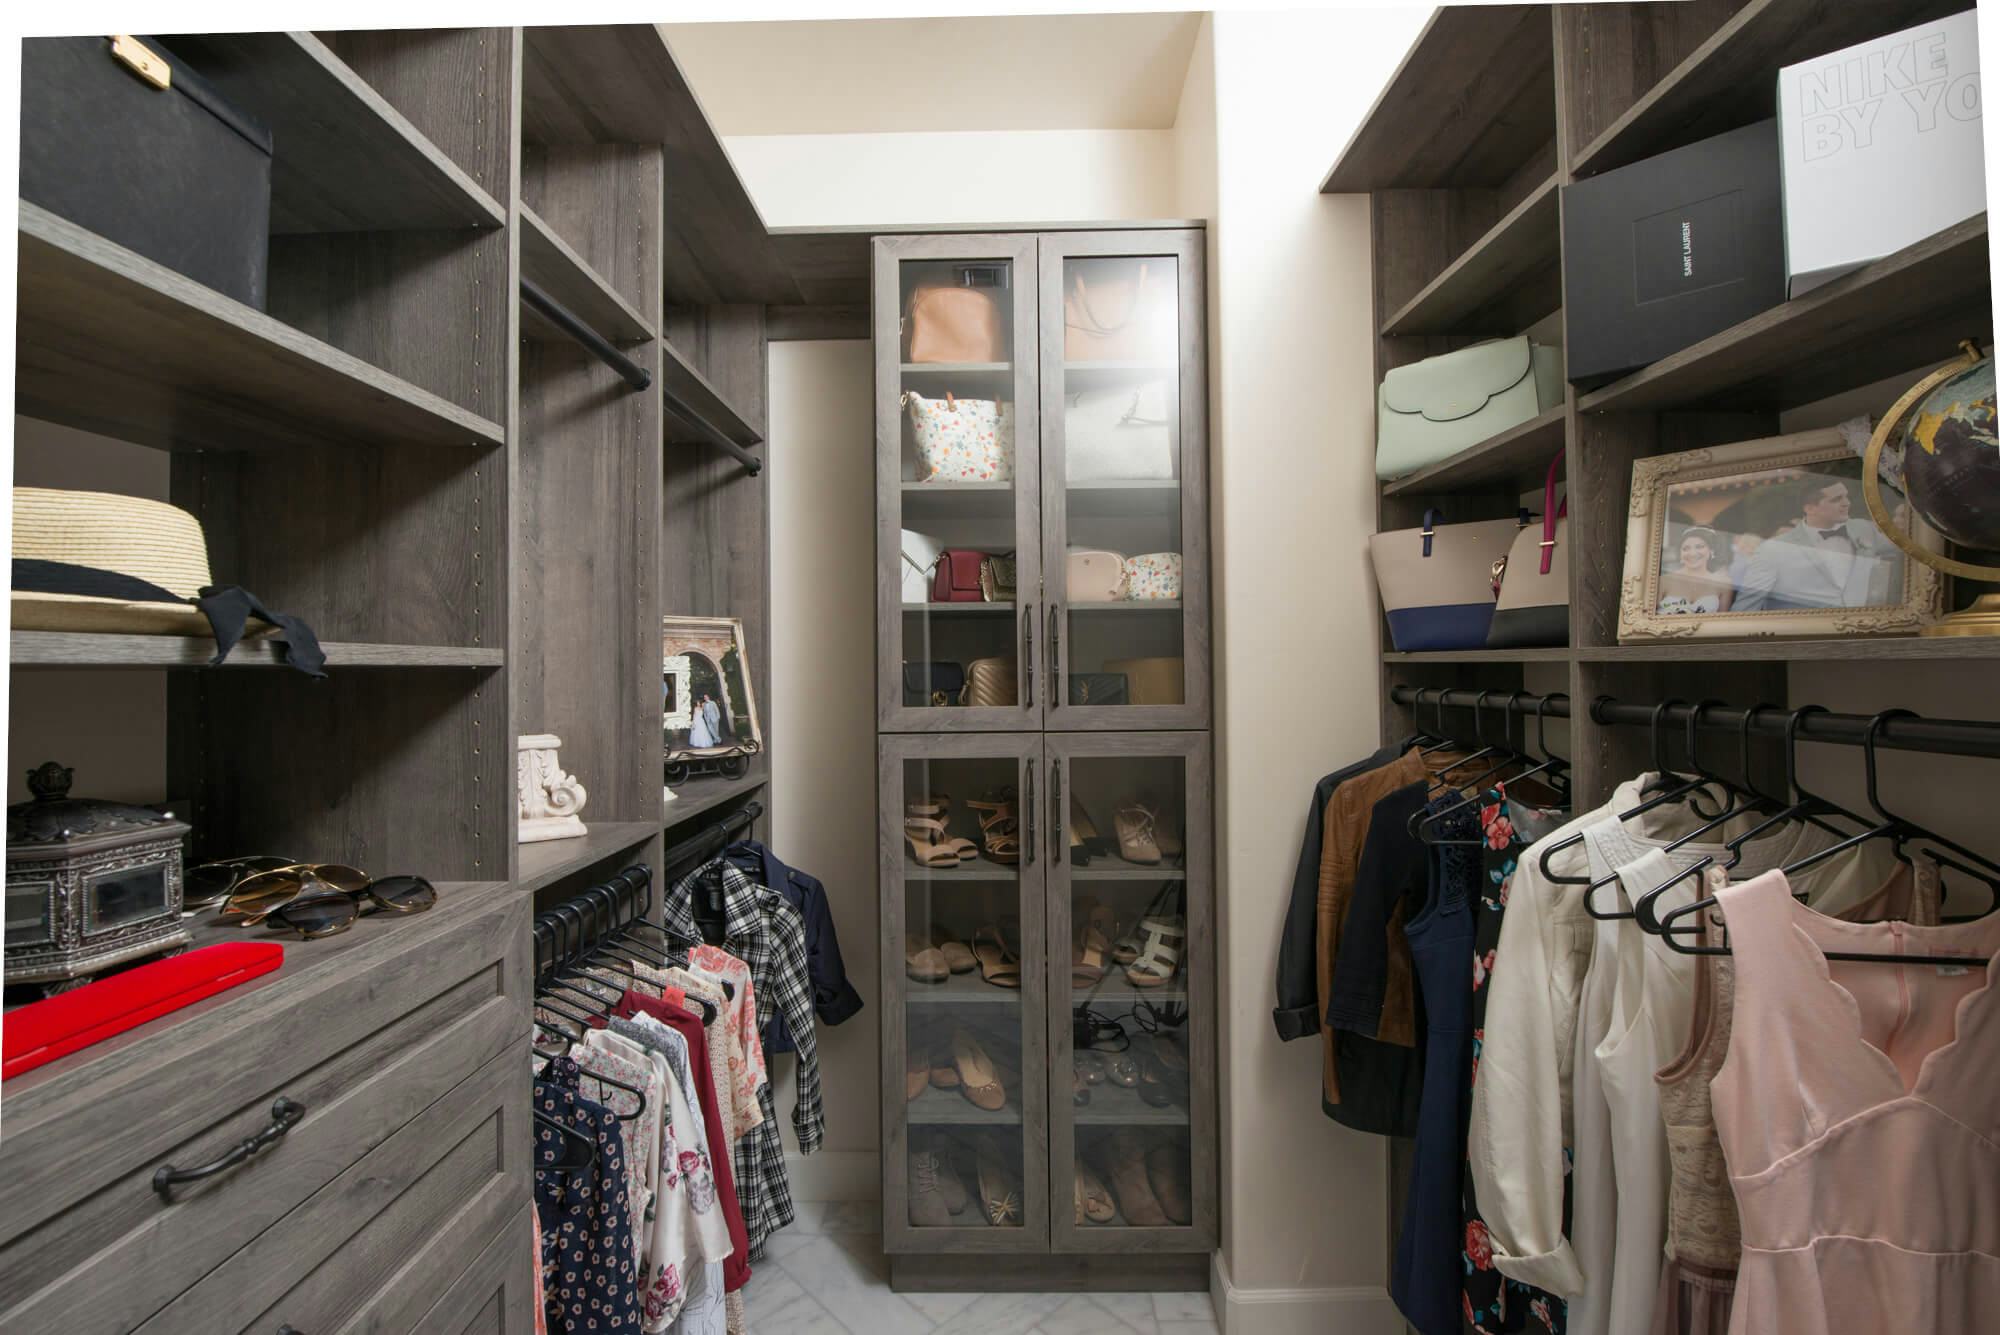 walk-in closet with middle glass show rack